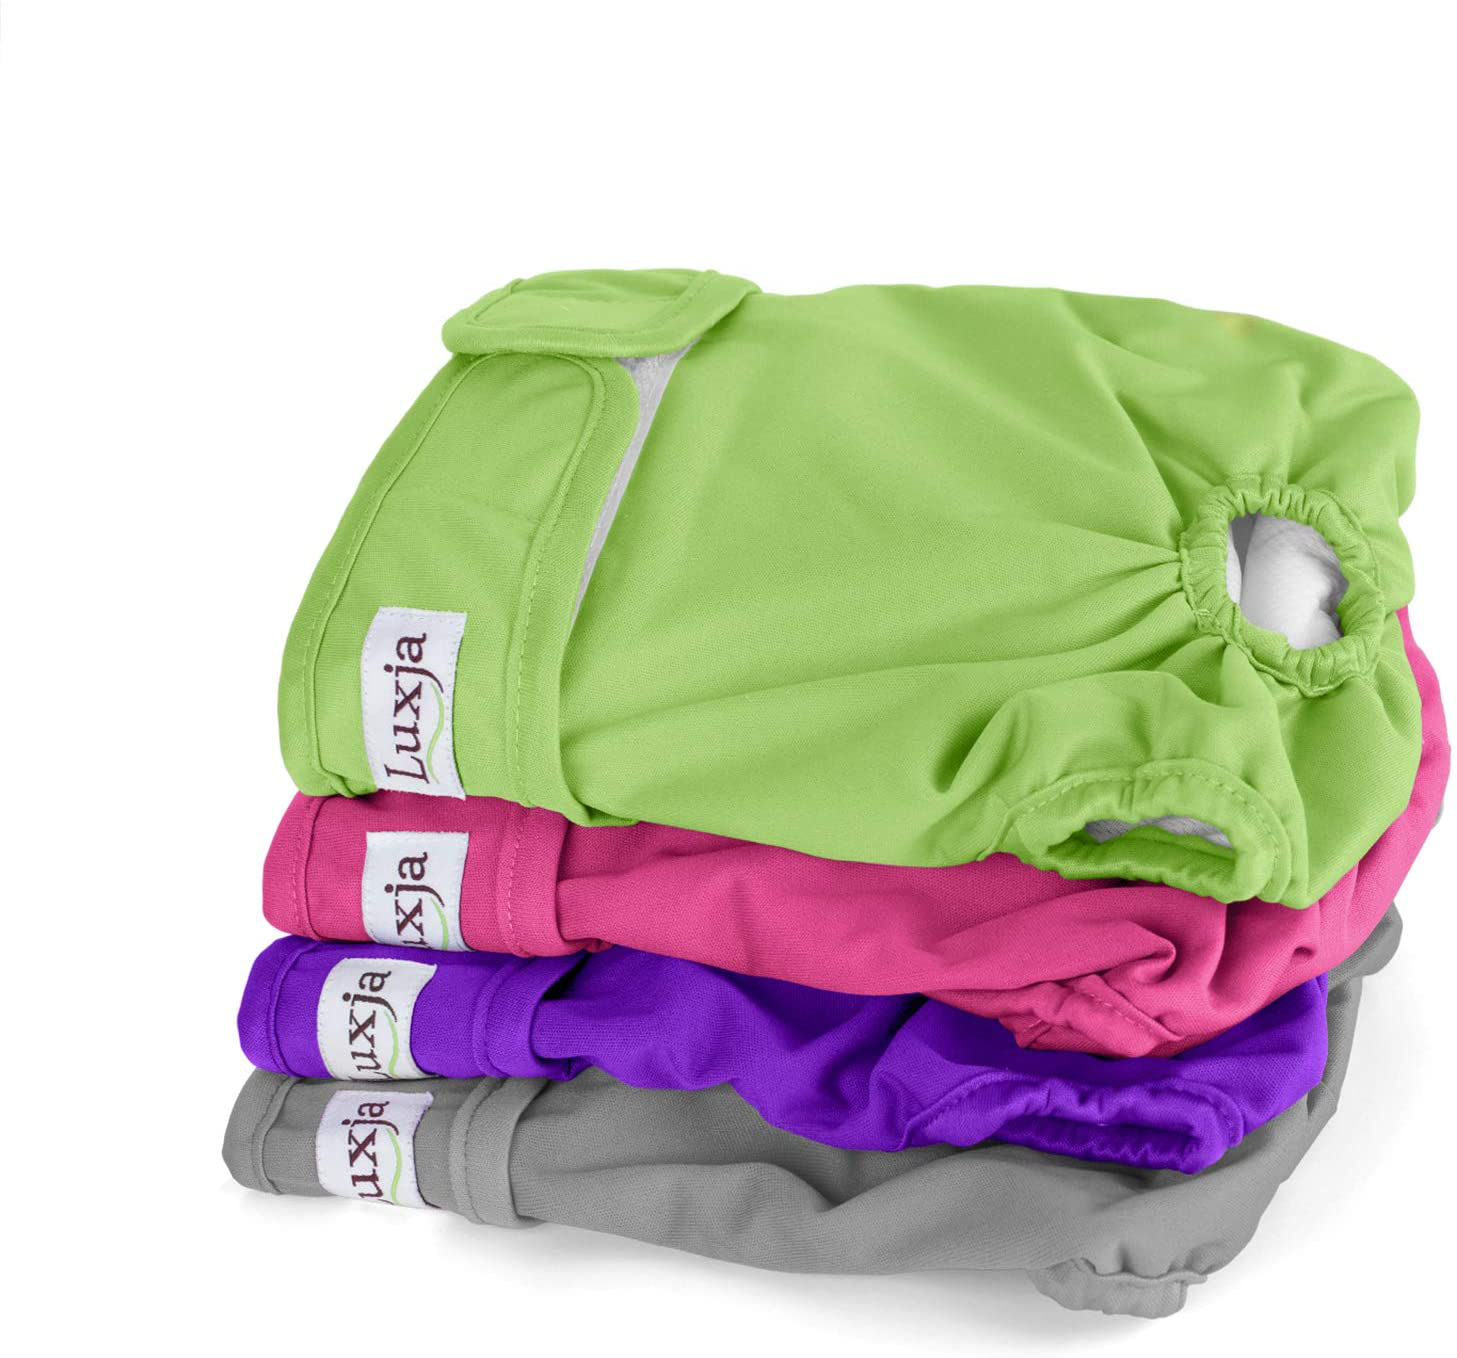 Luxja Reusable Female Dog Diapers (Pack of 4), Washable Wraps for Female Dog (Large 1, Gray+Green+Purple+Rose Red)